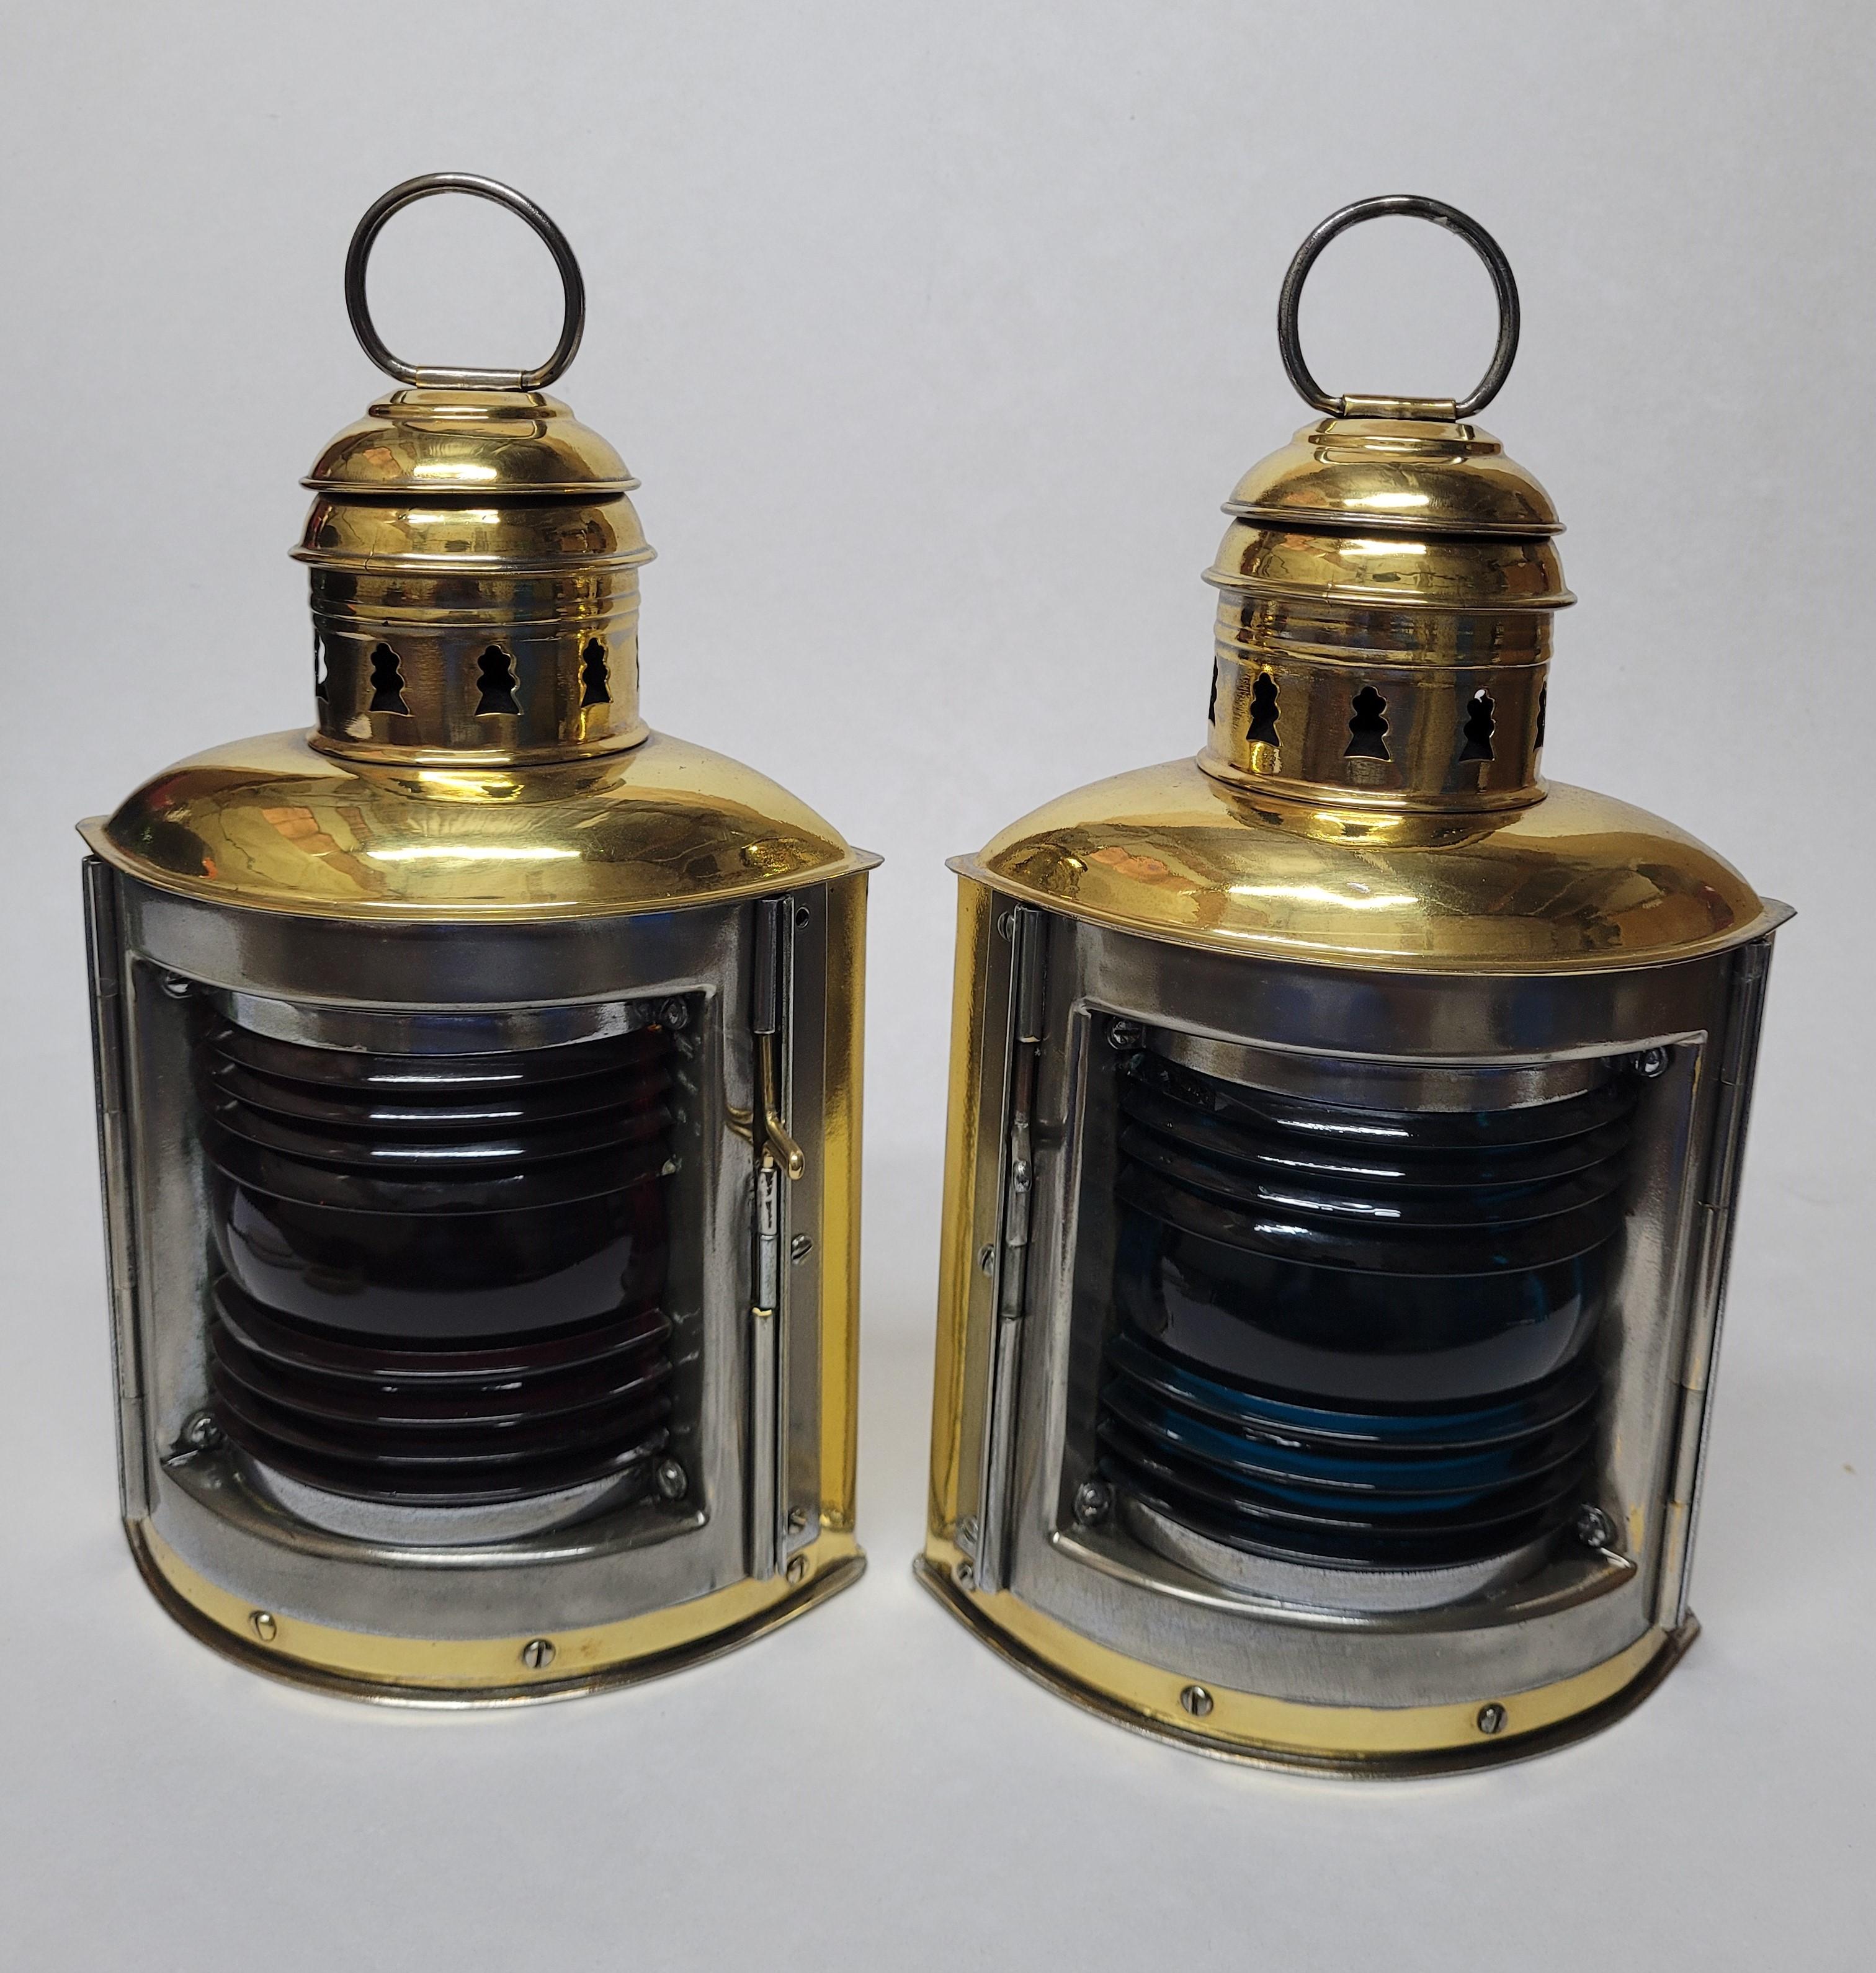 Sturdy pair of meticulously polished and laquered ships lanterns by Perko Delite. With steel framed doors, vented tops and carry rings. First class polish job. American Circa 1995.

Weight: 2.5 lbs.
Overall Dimensions: 12